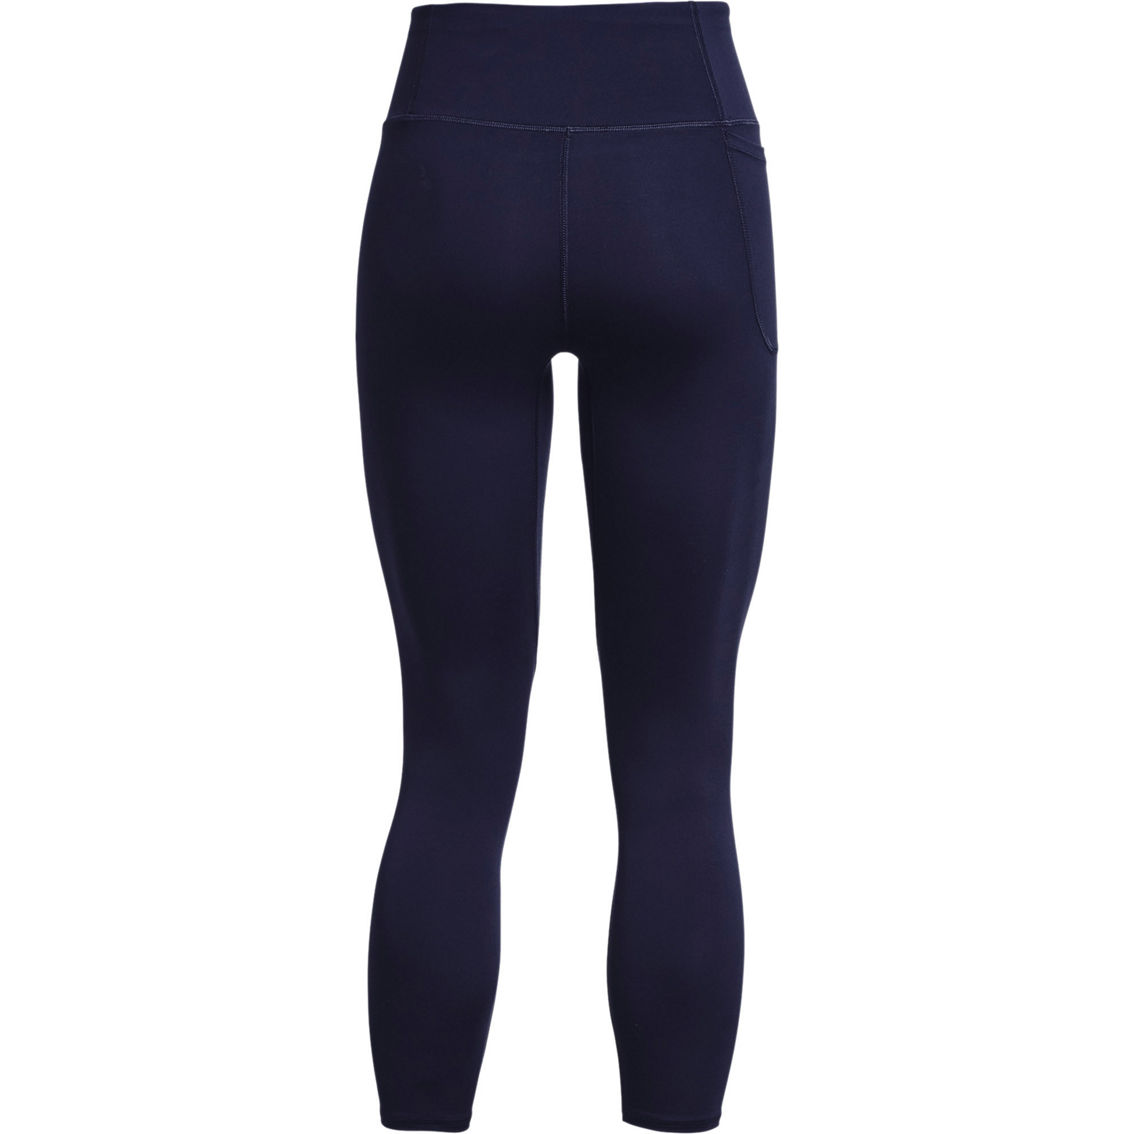 Under Armour Motion Ankle Leggings - Image 6 of 7